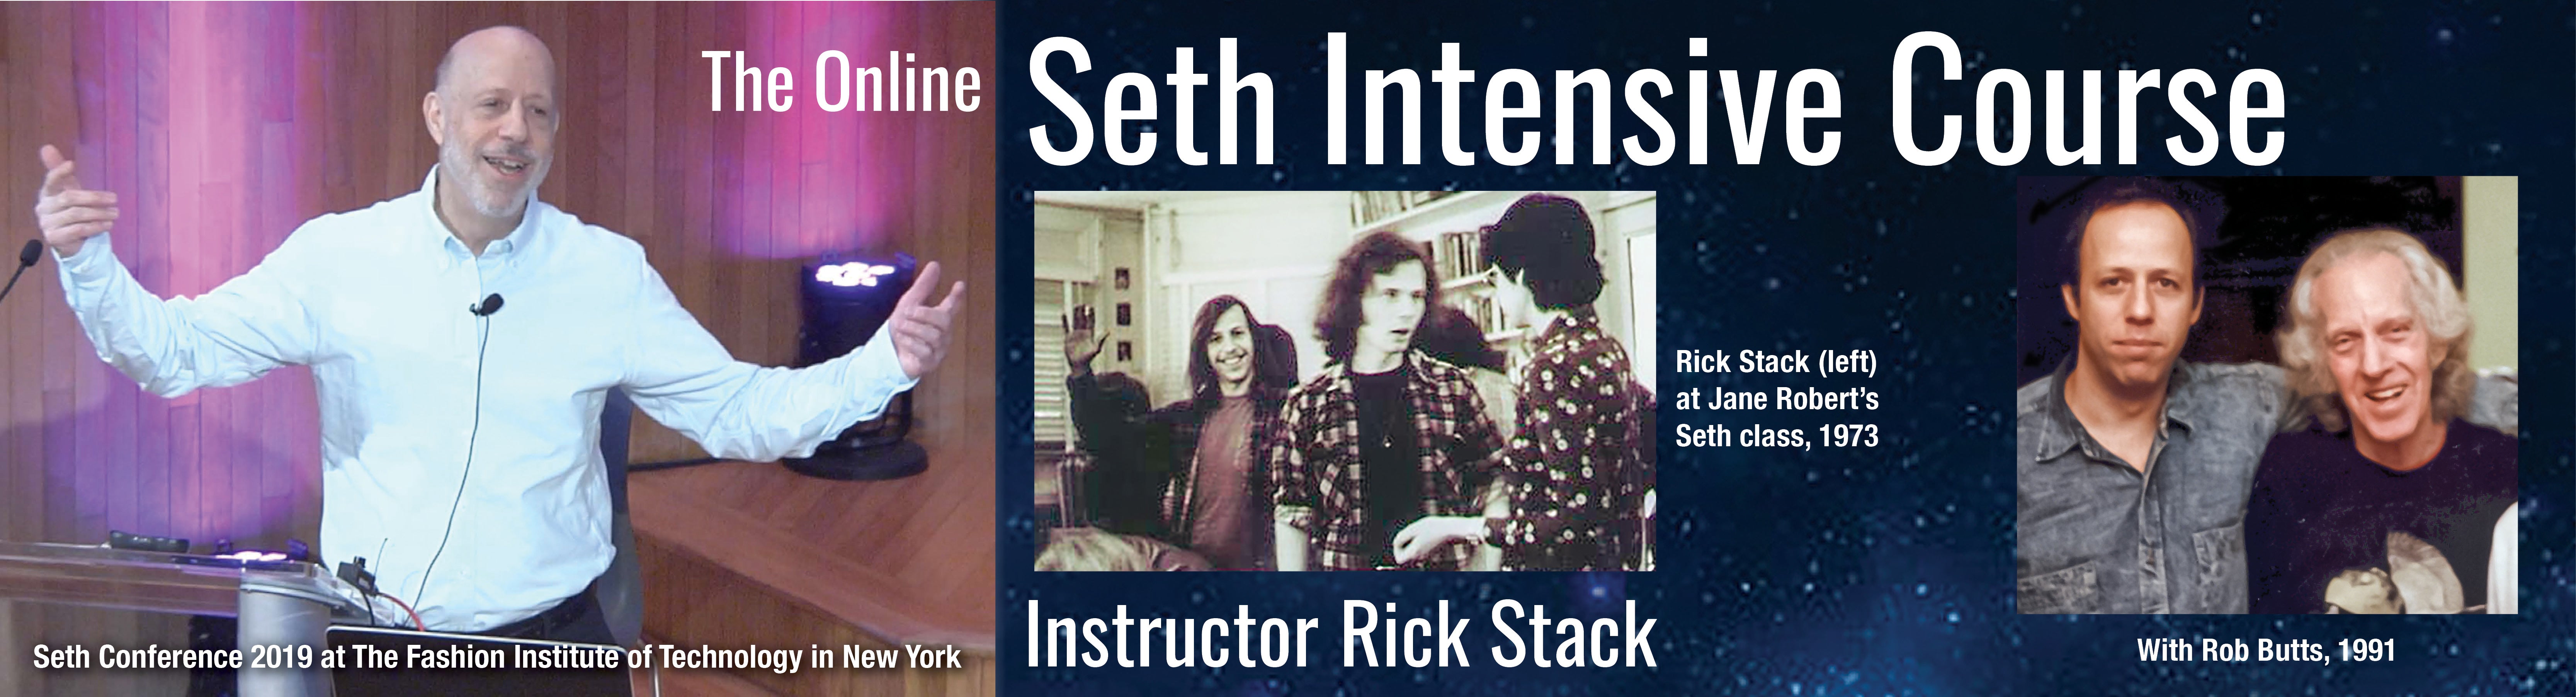 The Online Seth Intensive Course